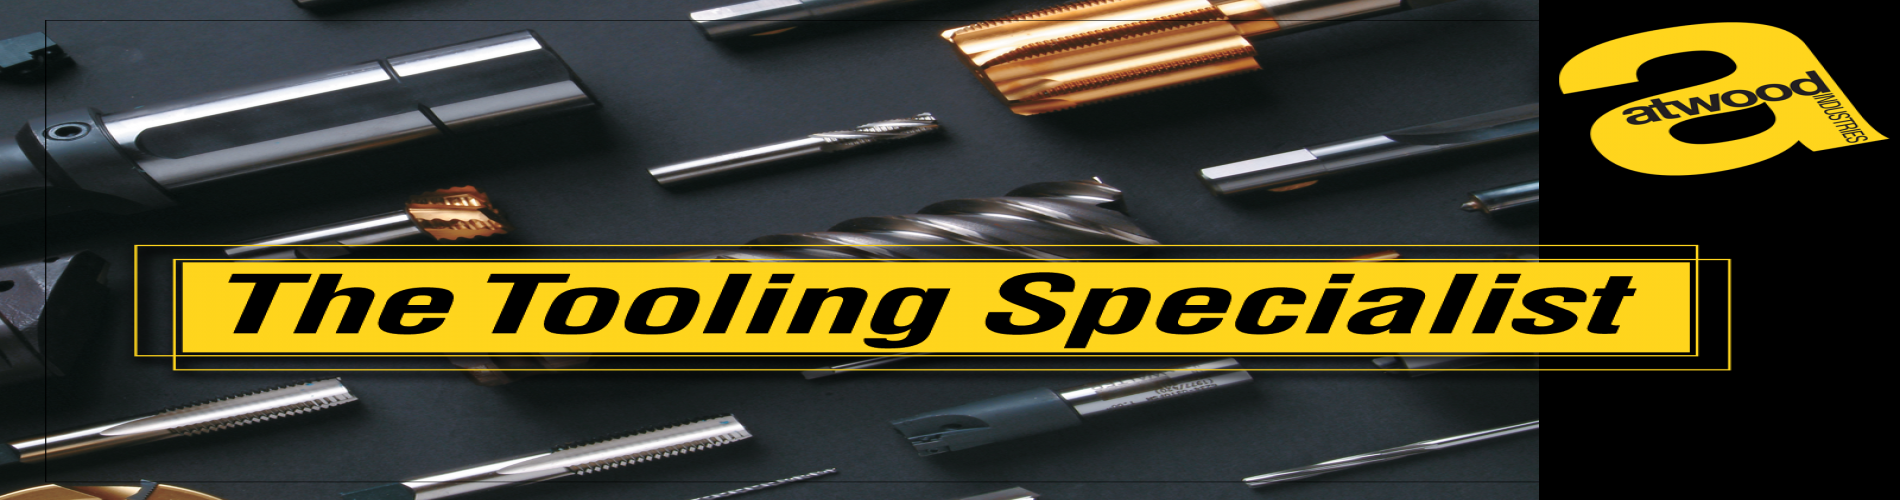 Tooling Specialists